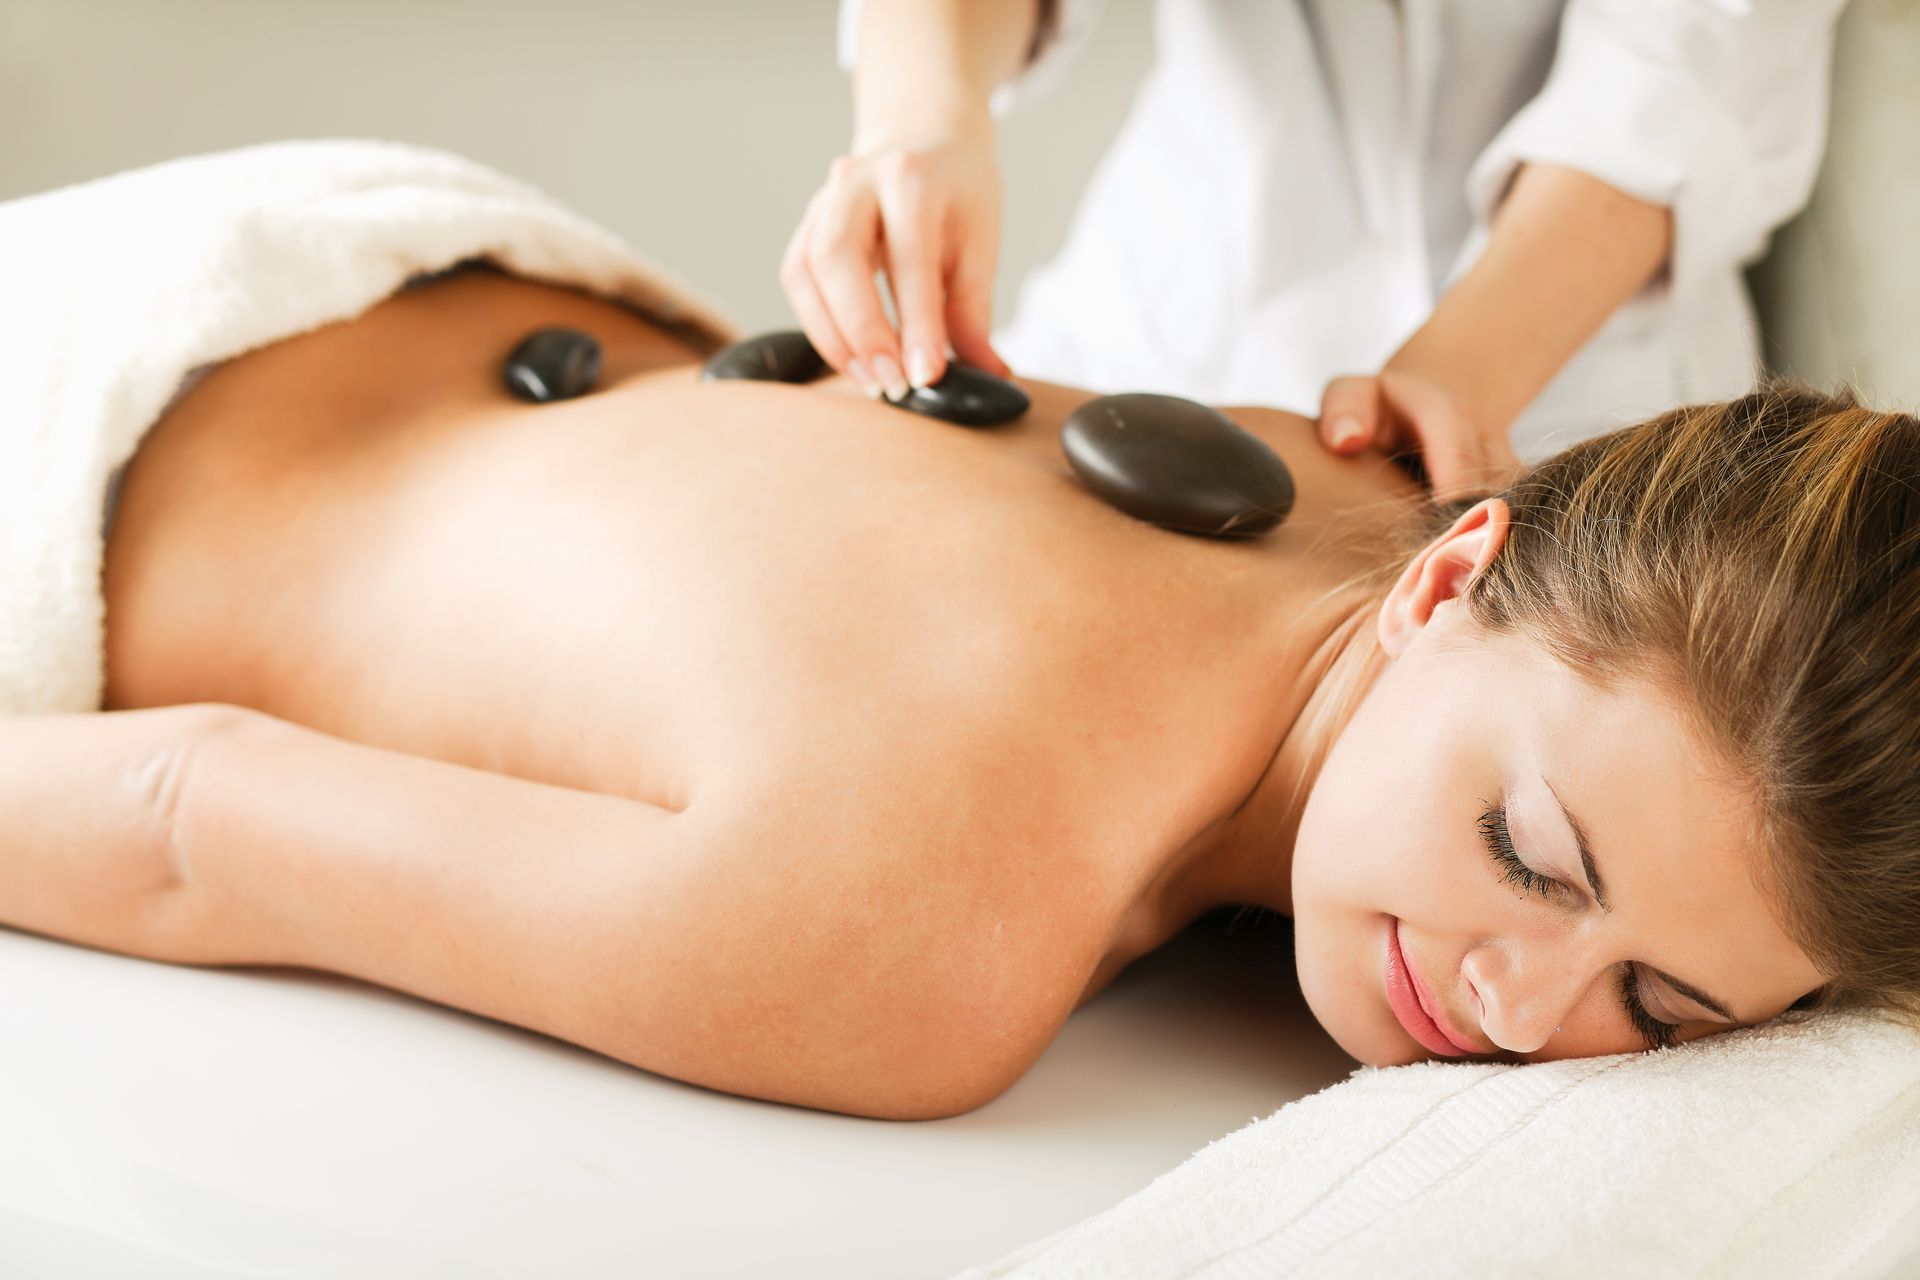 A woman is getting a hot stone massage at a spa.